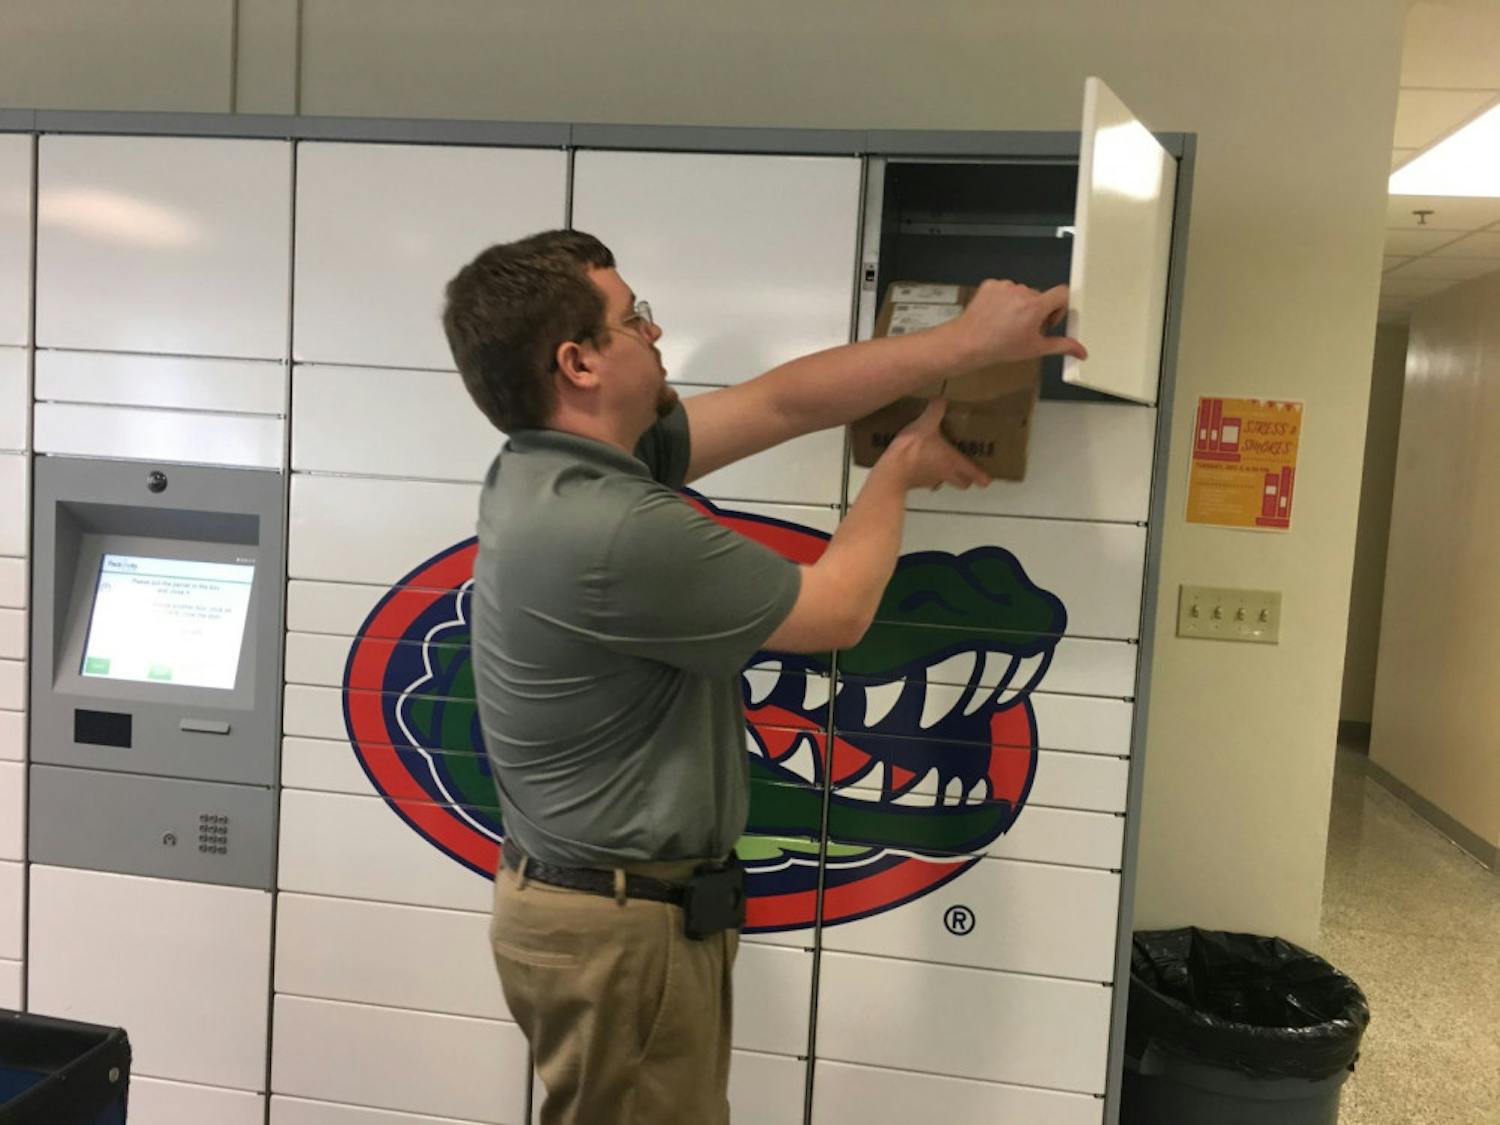 Nicholas Dunkel, an asset specialist with UF Housing, delivered some of the first packages to the Neopost lockers at Jennings.